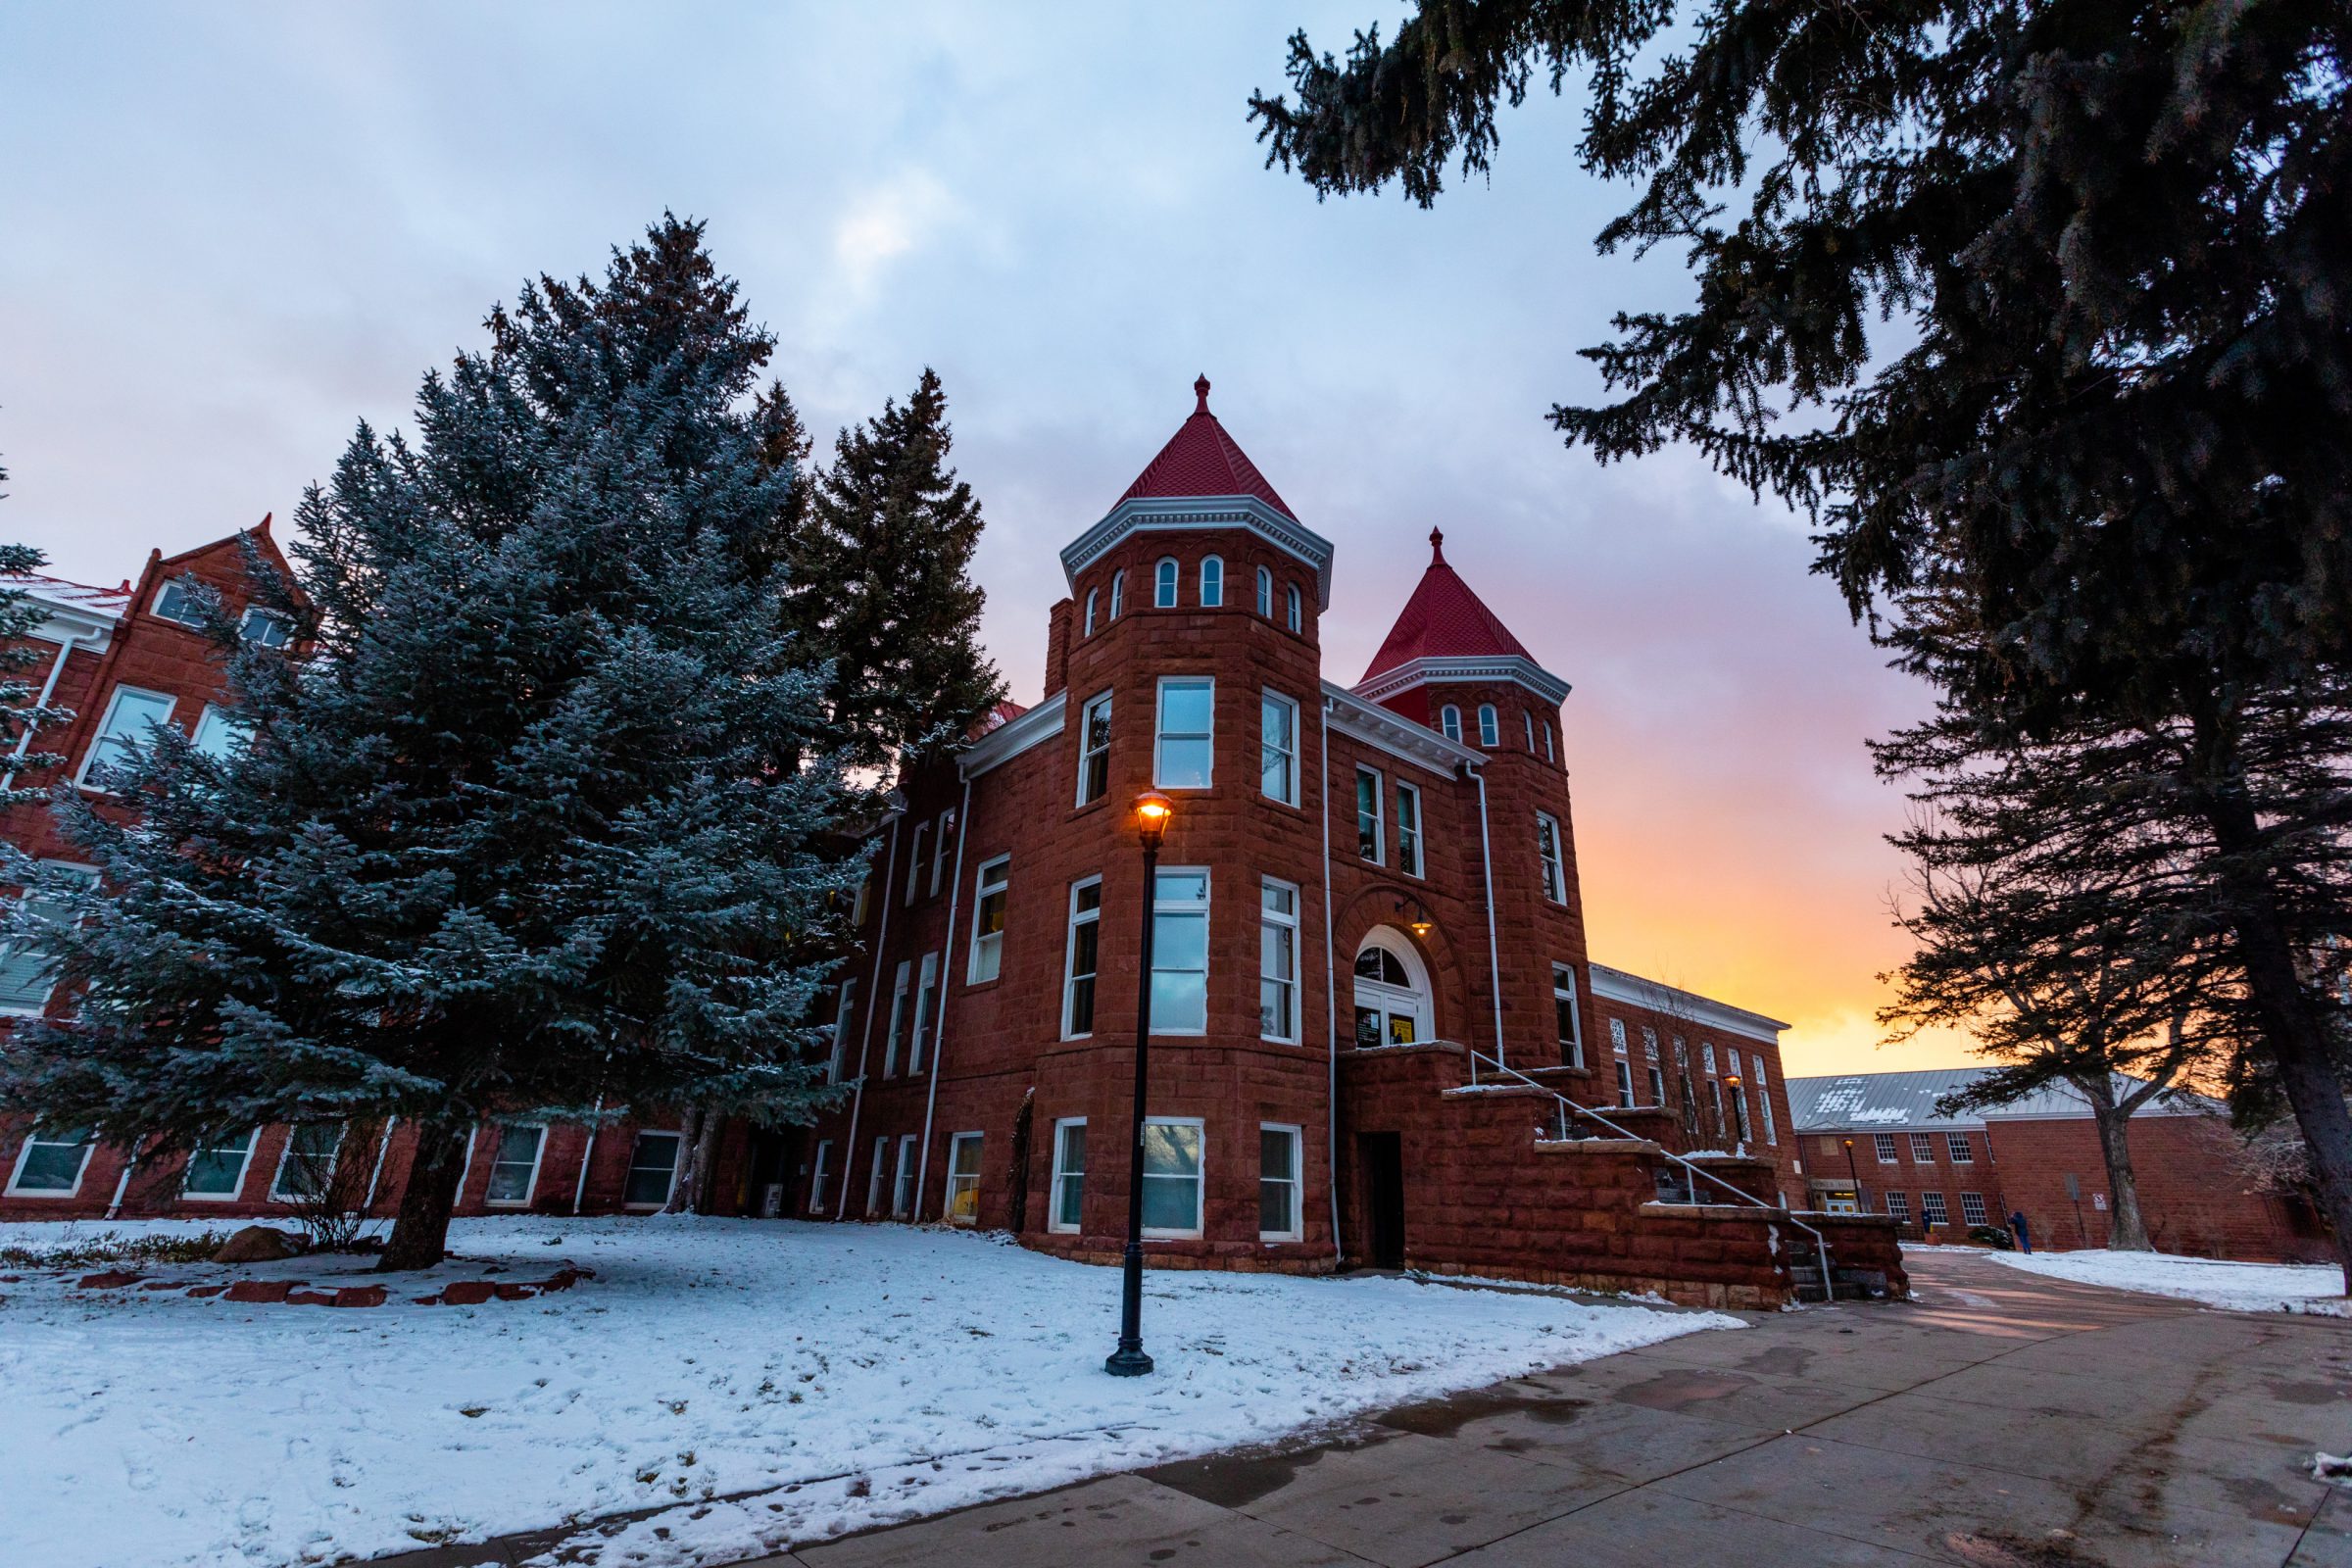 Old Main campus building on a snowy day with a sunset in the background.